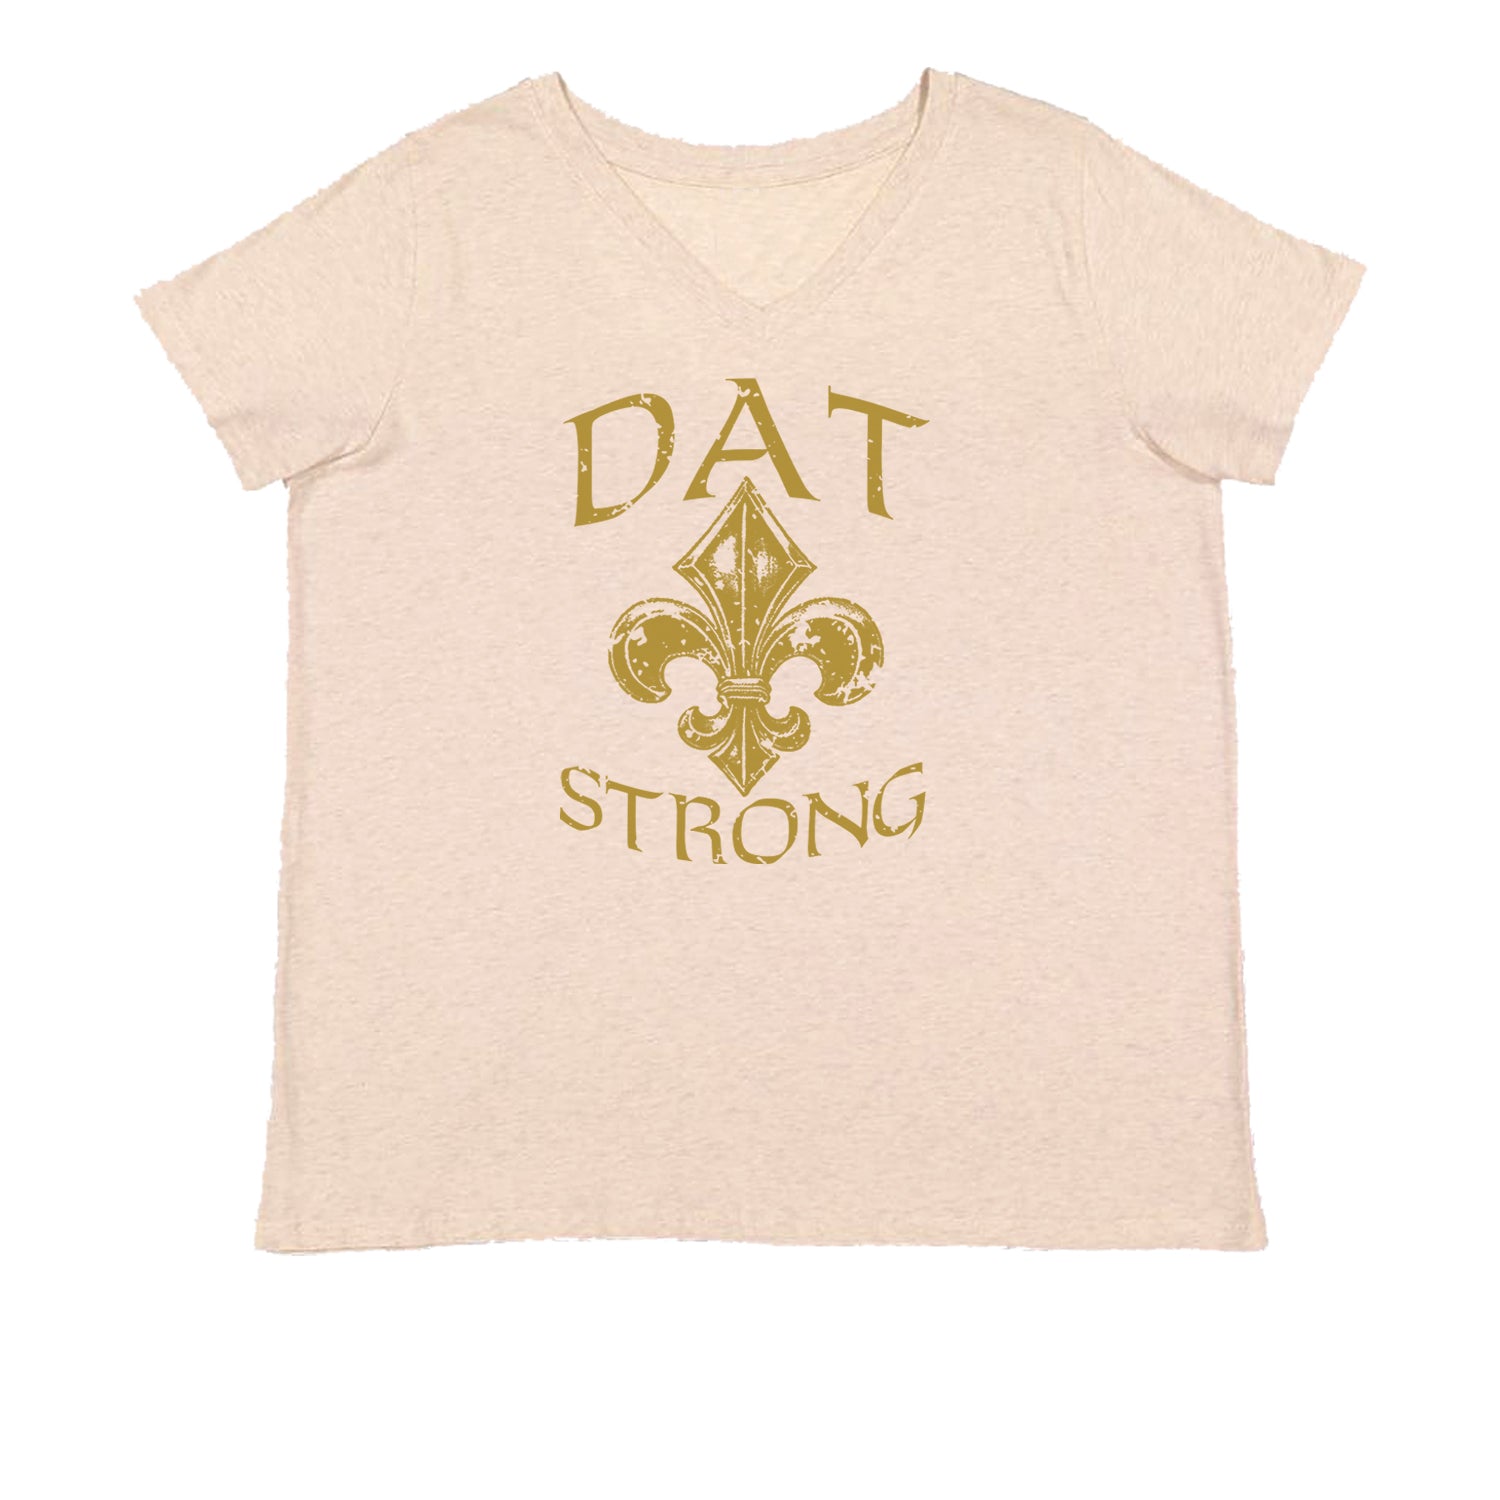 Dat Strong New Orleans Womens Plus Size V-Neck T-shirt dat, de, fan, fleur, jersey, lis, new, orleans, sports, strong, who by Expression Tees